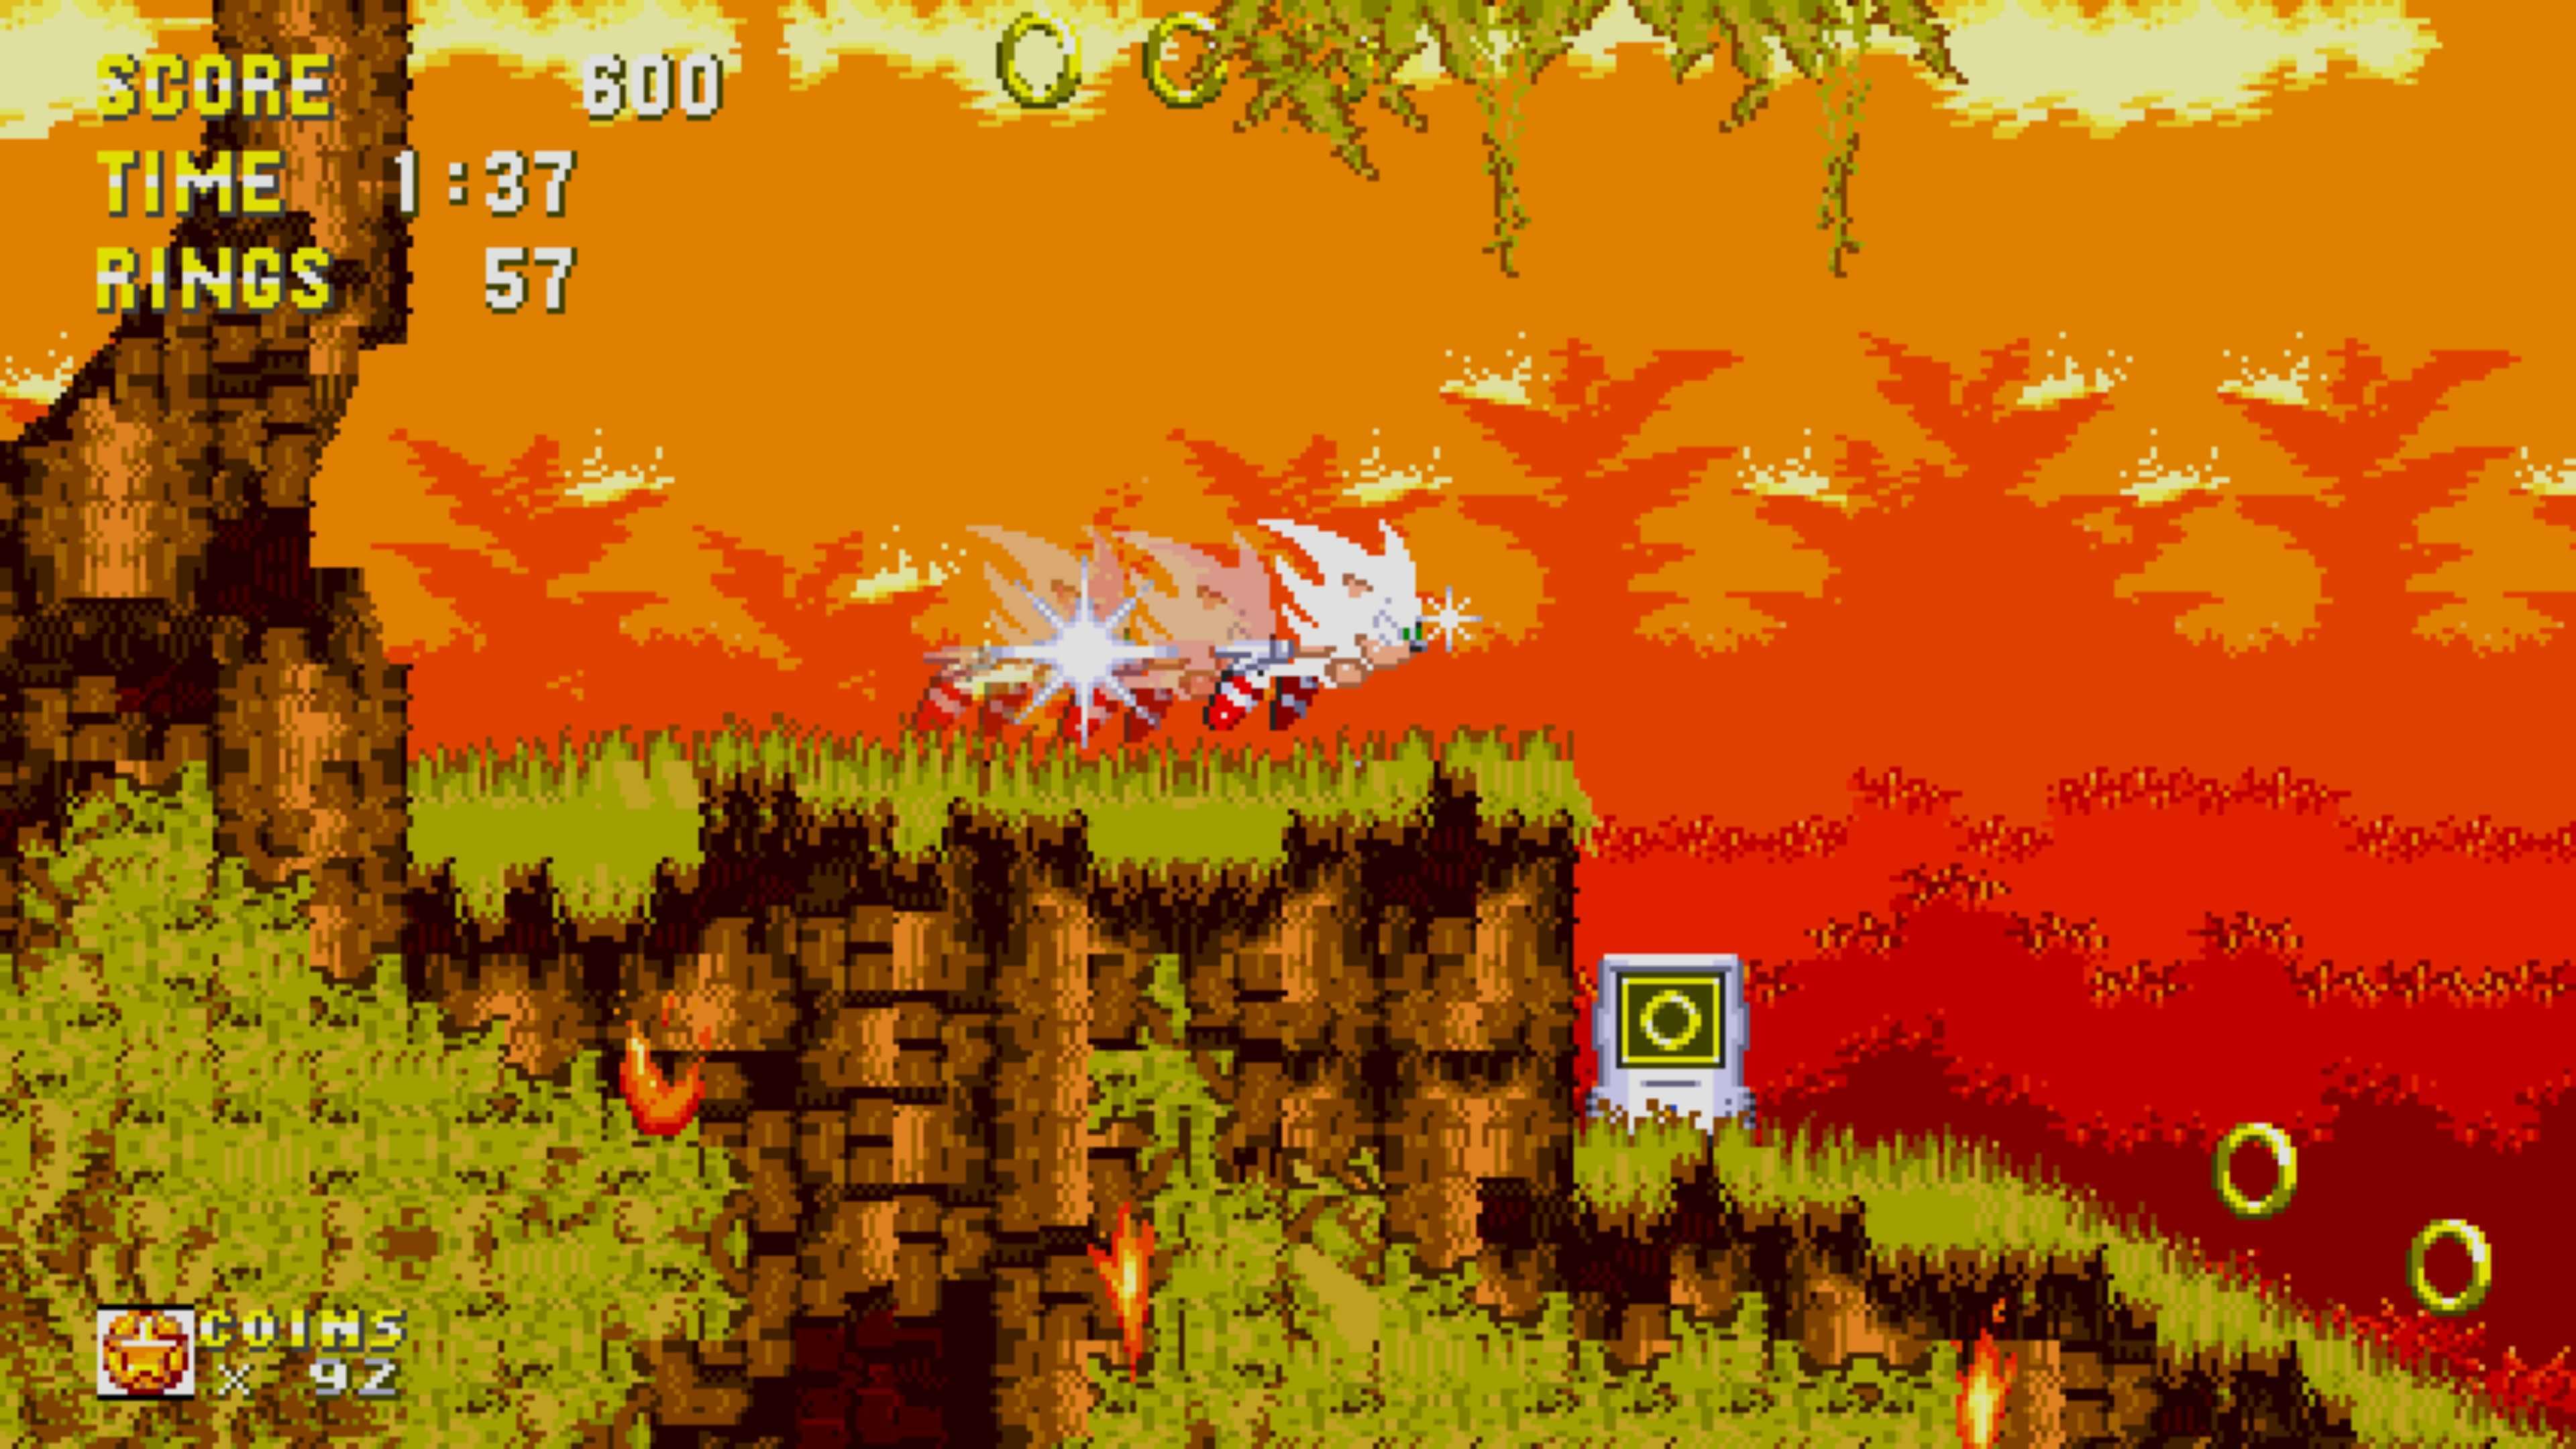 Let's try Super Sonic and Hyper Sonic in Sonic 1 (OLD) 